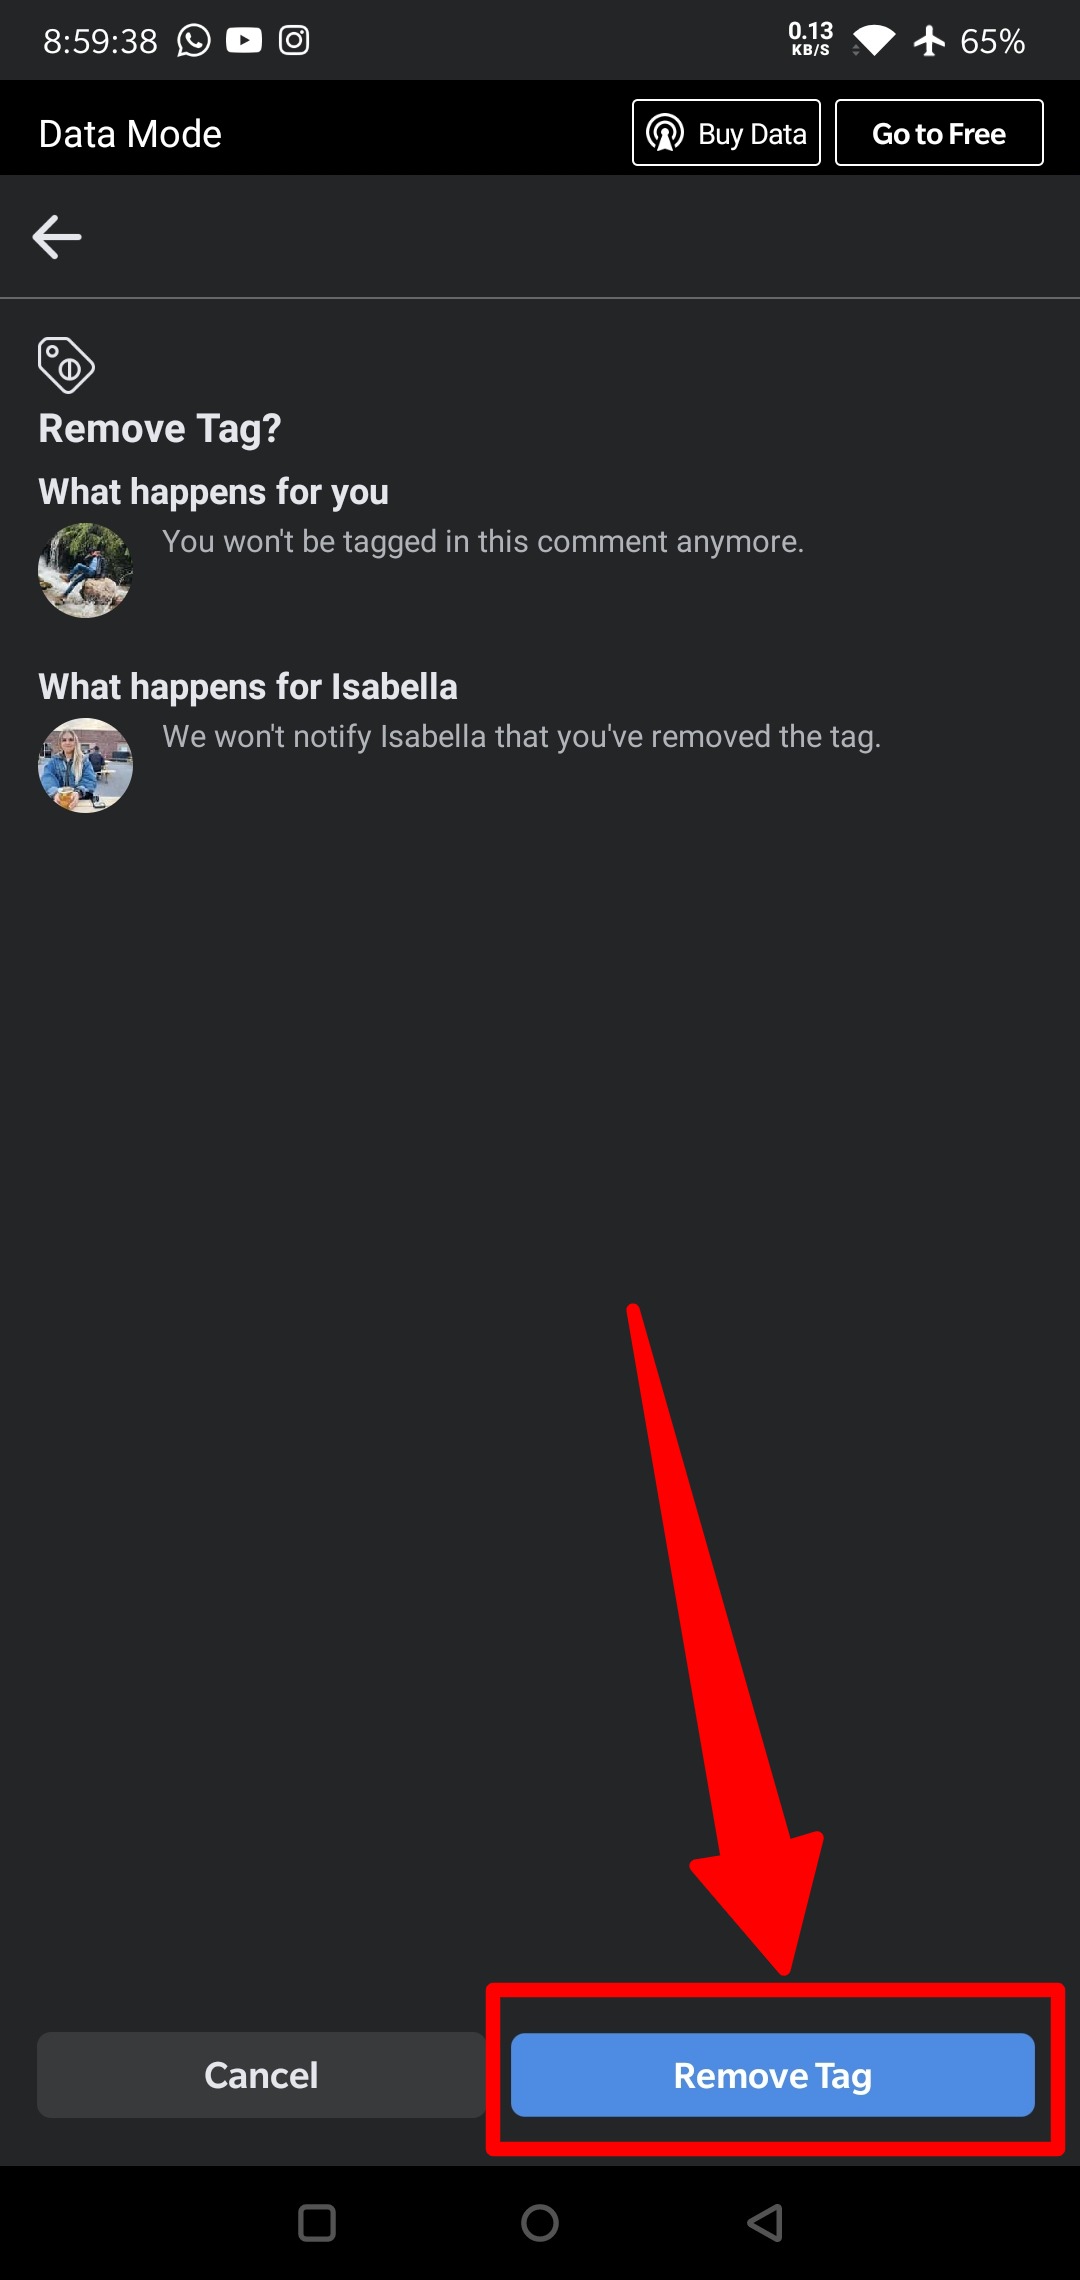 tap remove tag button and it will remove the tag from comments